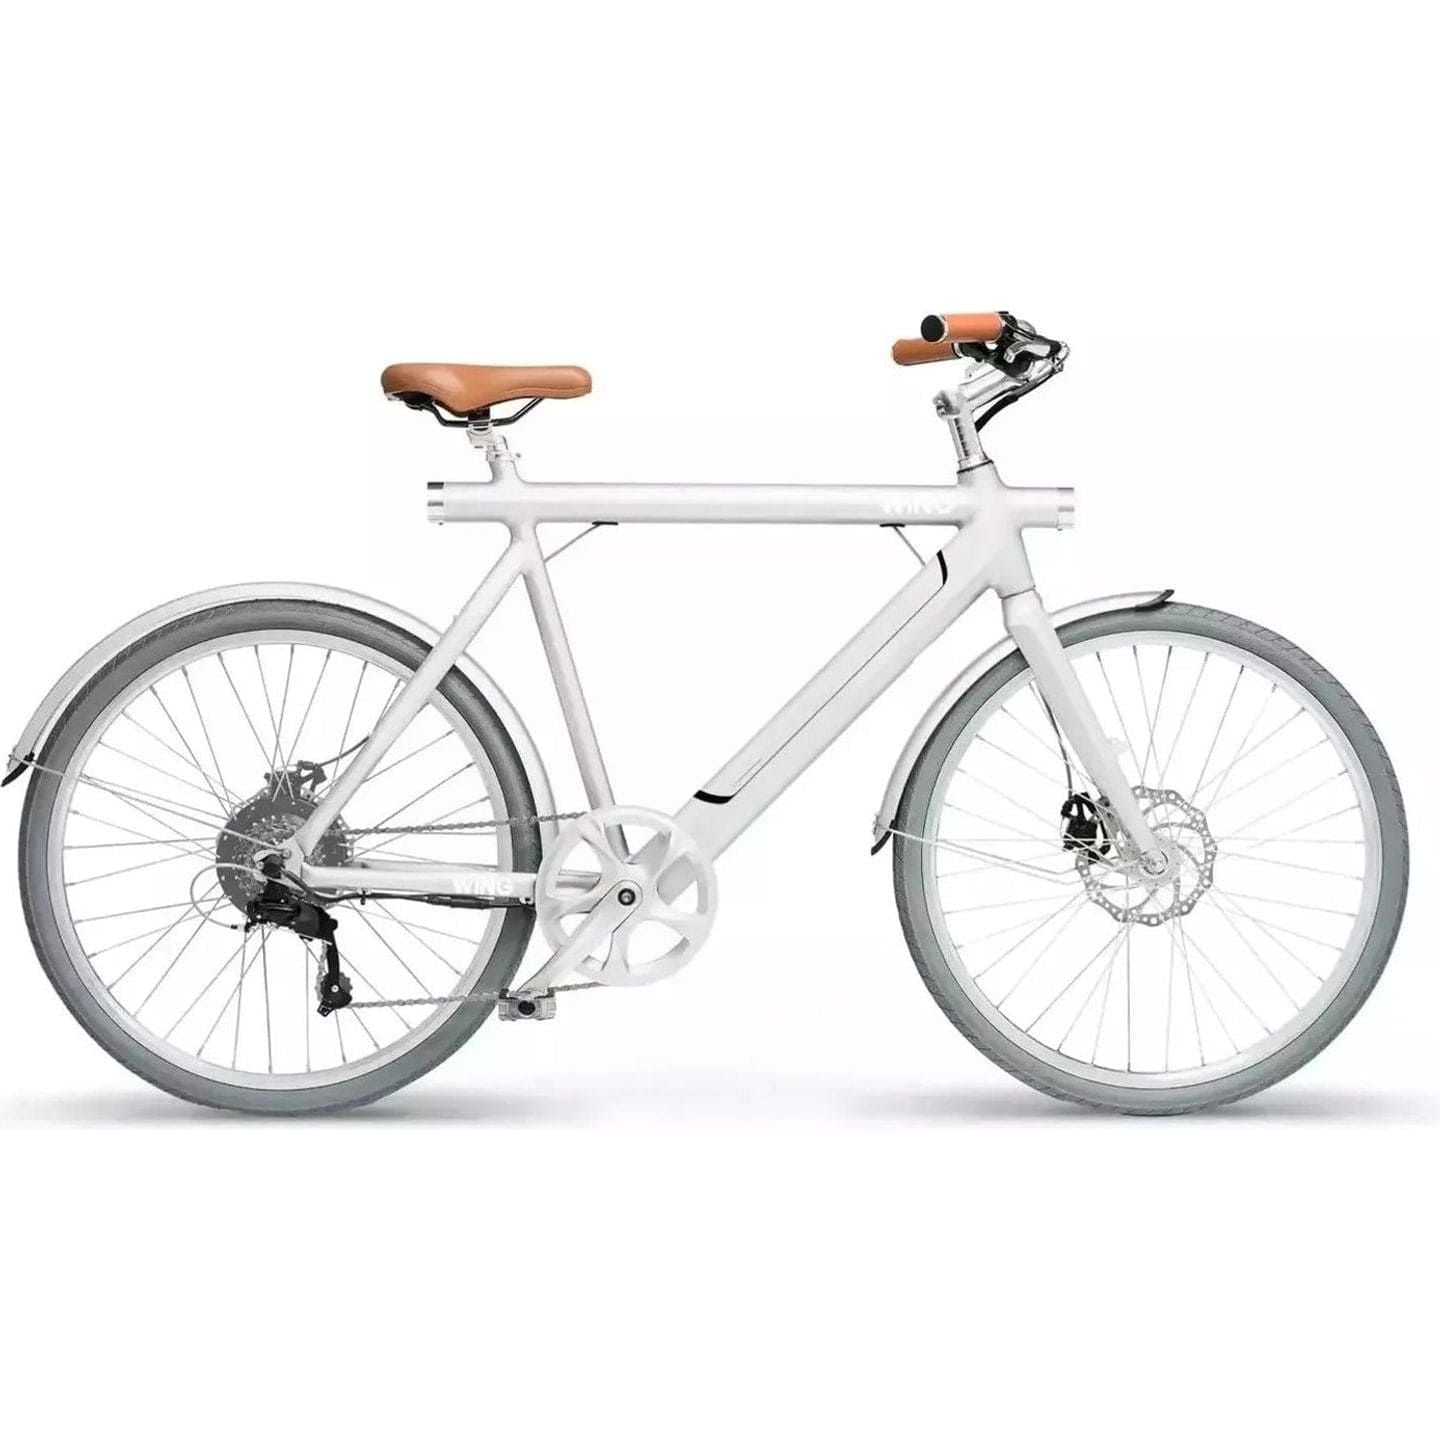 Wing Bikes Bicycles Silver / Standard Freedom X